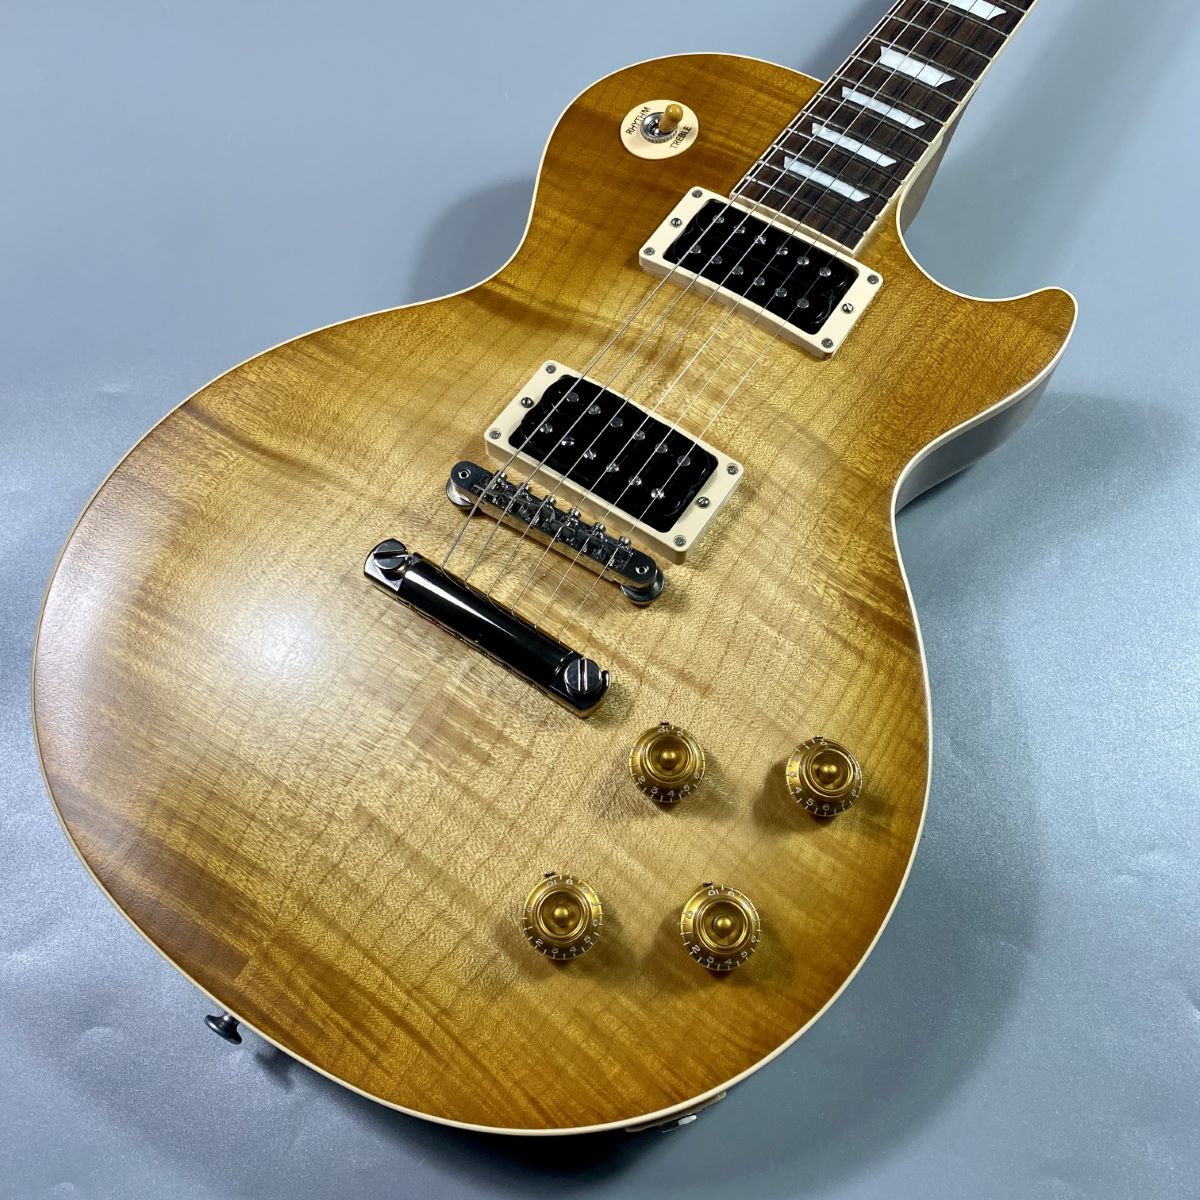 GibsonGibson Les Paul Standard 50s Faded VHB【USED】